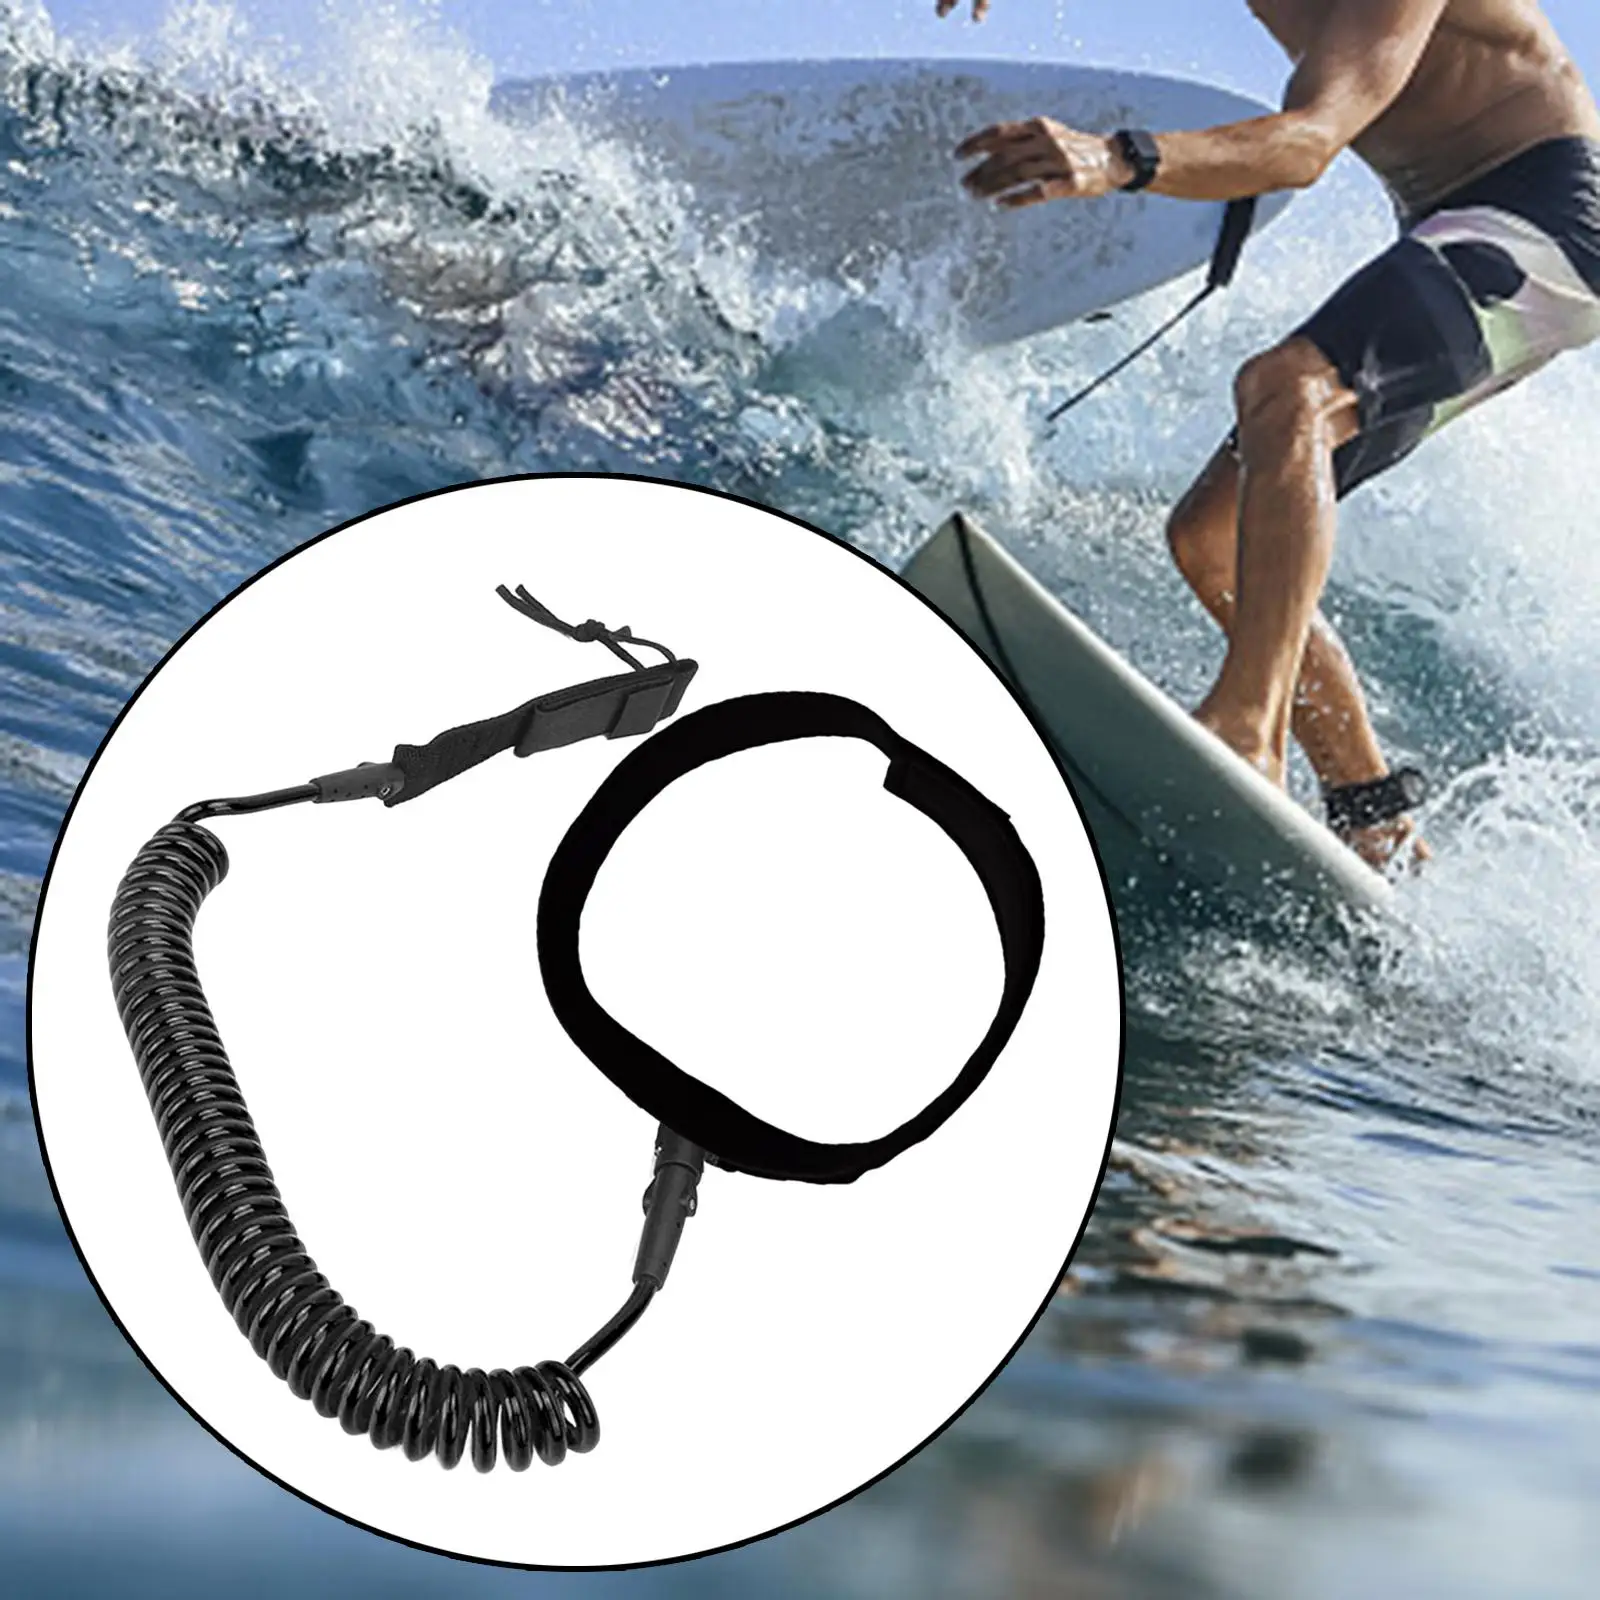 Surf Leash Surf Board Leashes Elastic Cord Coiled Surfboard Leash for All Types of Surfboards Shortboard Longboard Skimboard